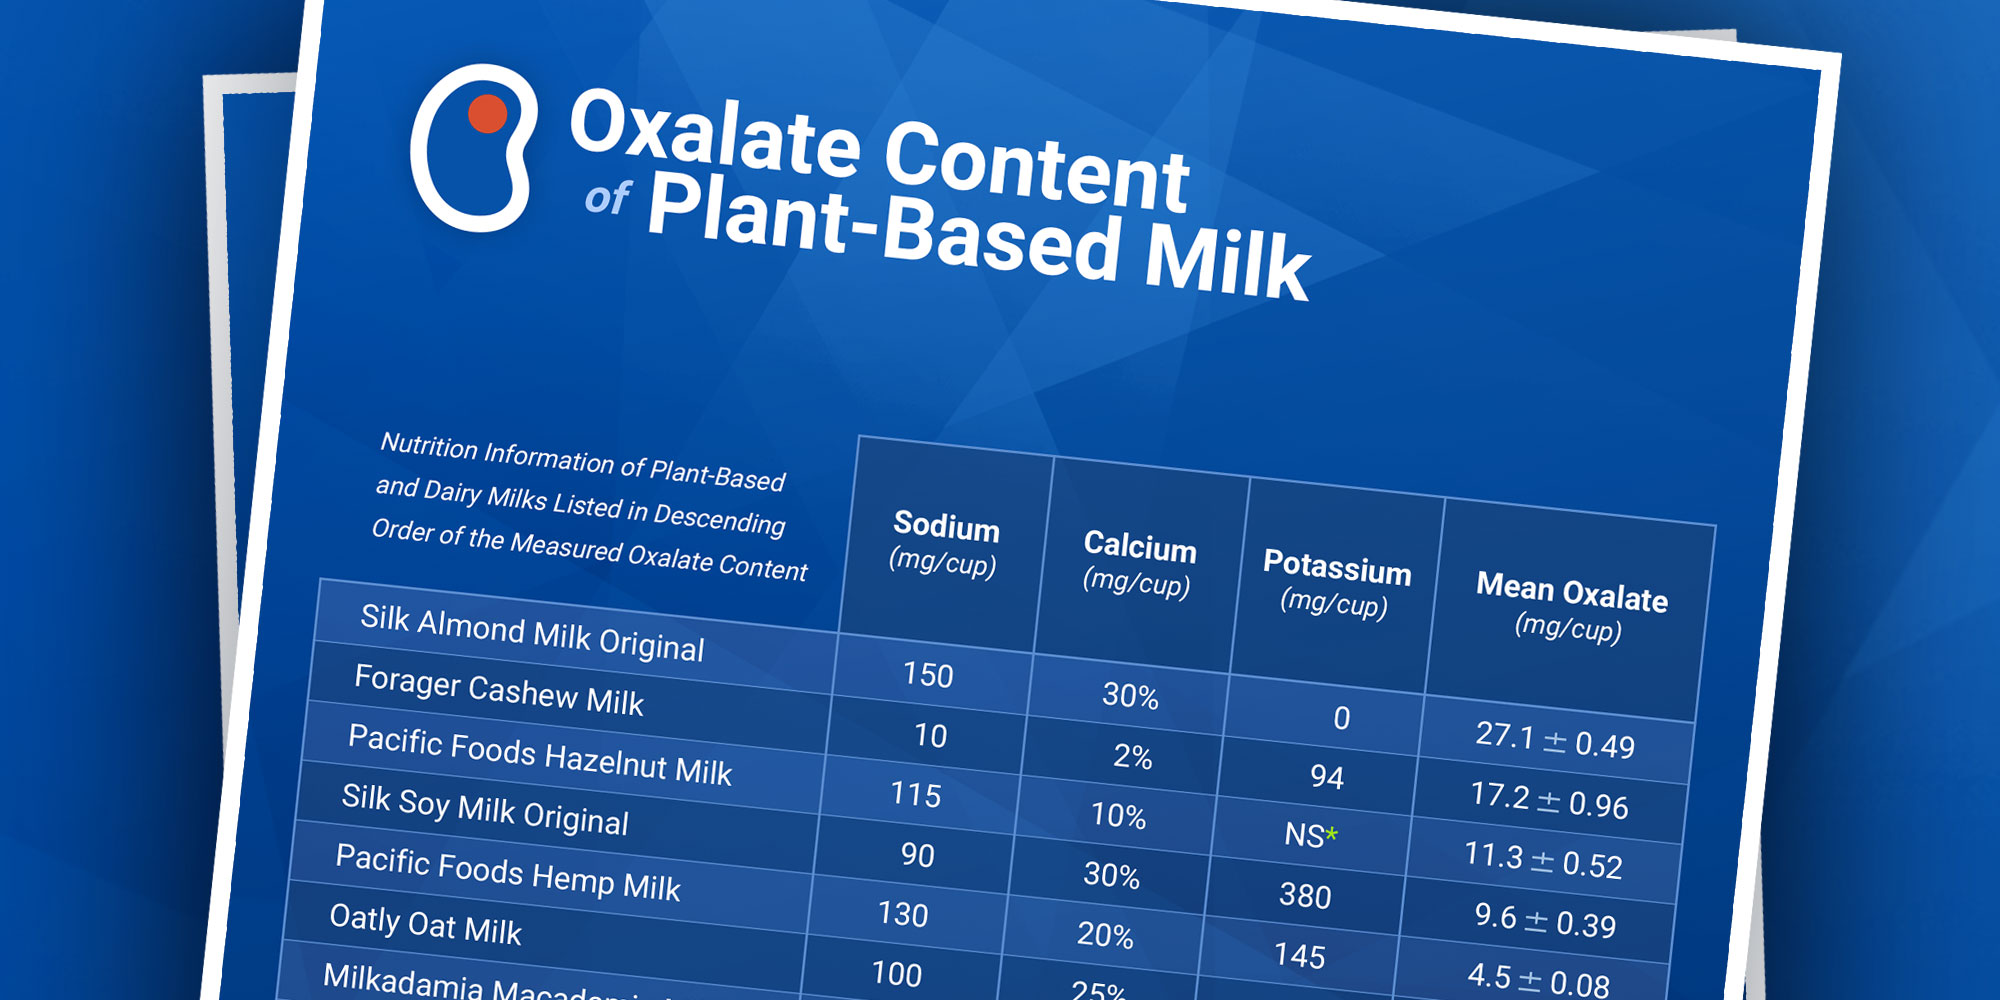 Oxalate Content of Plant-Based Milk